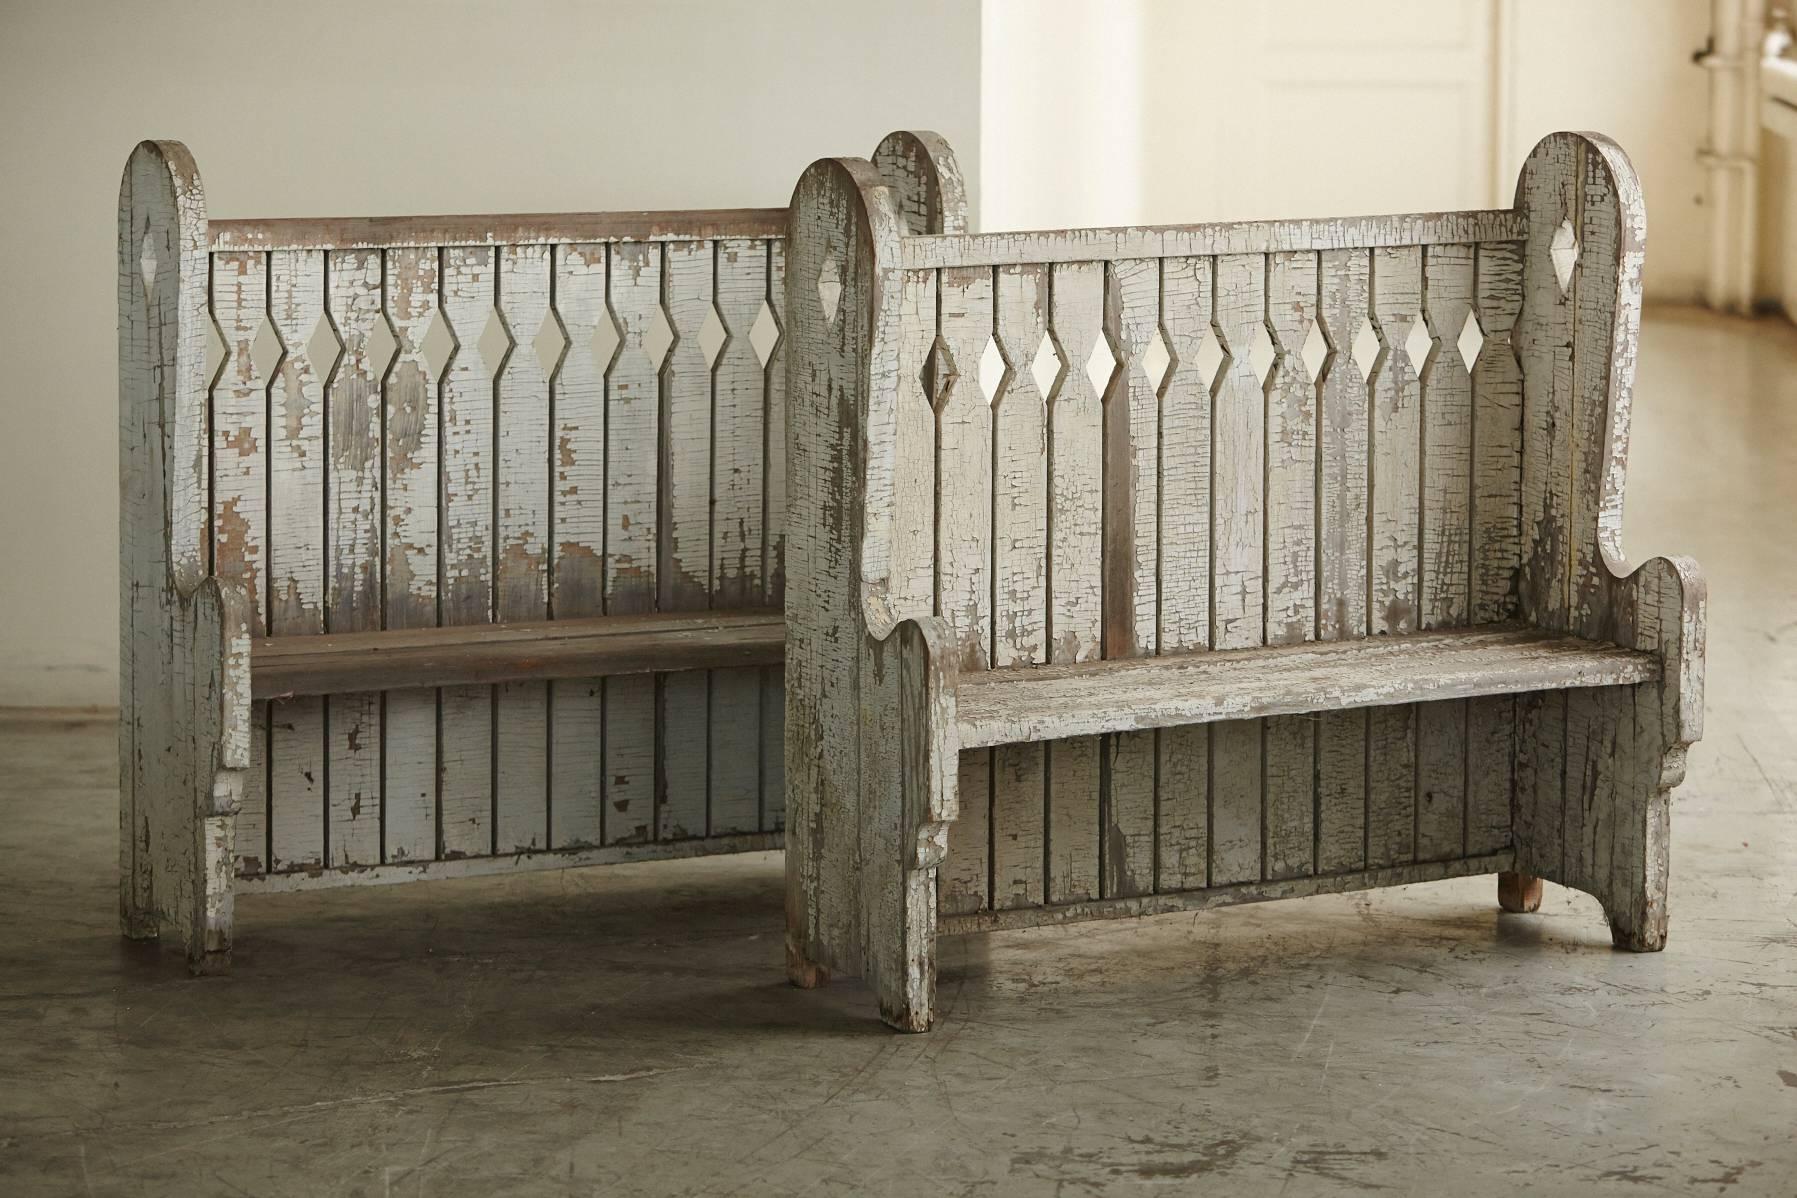 Rare pair of matching oak high back settle benches from the late 19th century.
Original paint, beautifully weathered with oxidized patina and a nice craquelure.
Graphic and puristic cut-out pattern in the back.
 